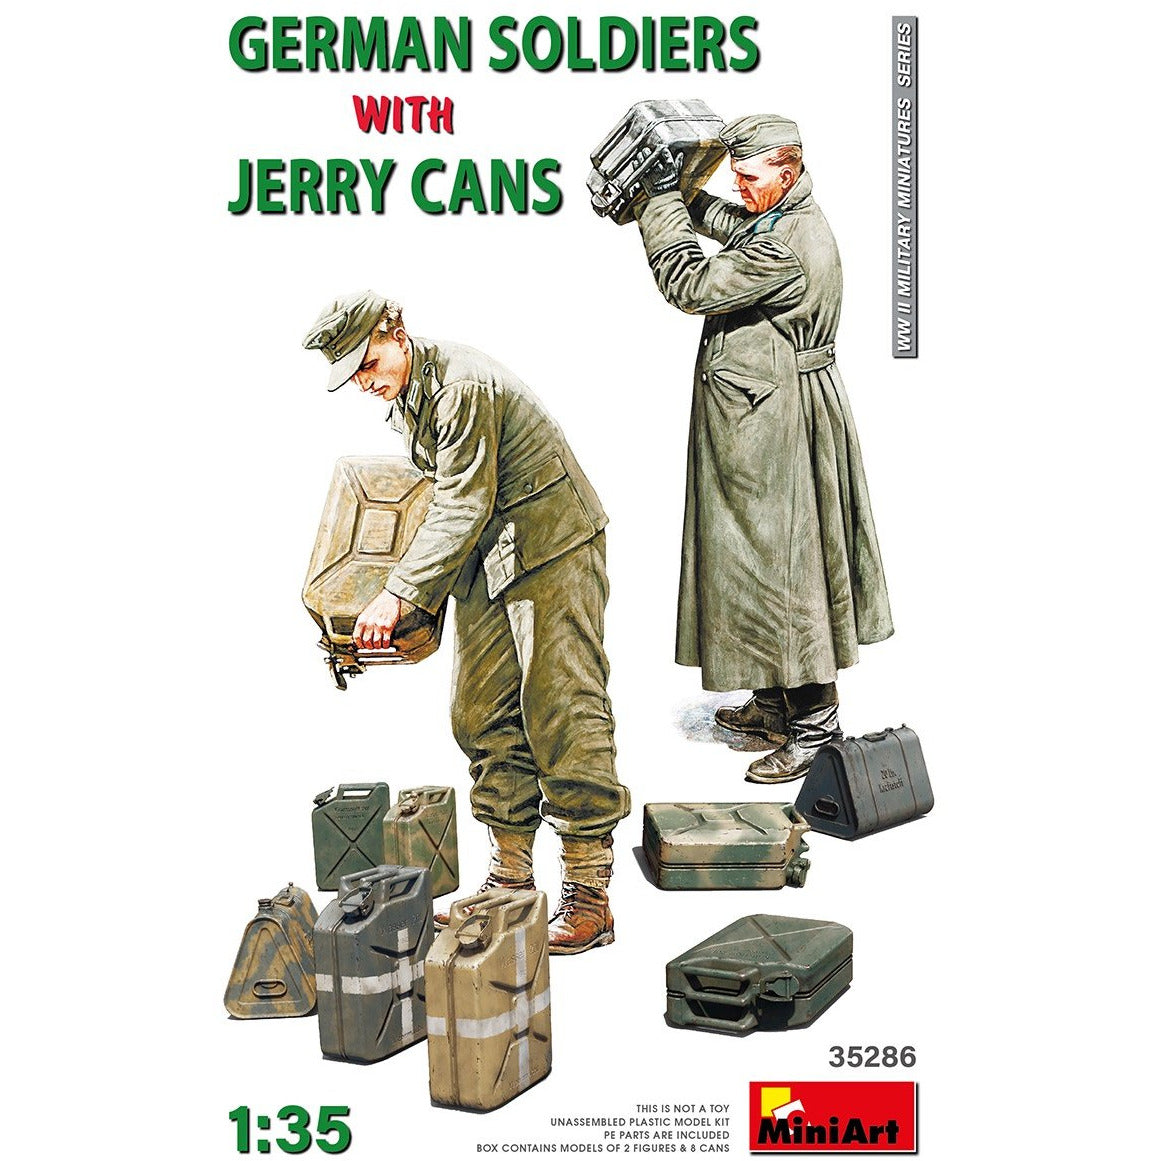 German Soldiers w/ Jerry Cans #35286 1/35 Figure Kit by MiniArt